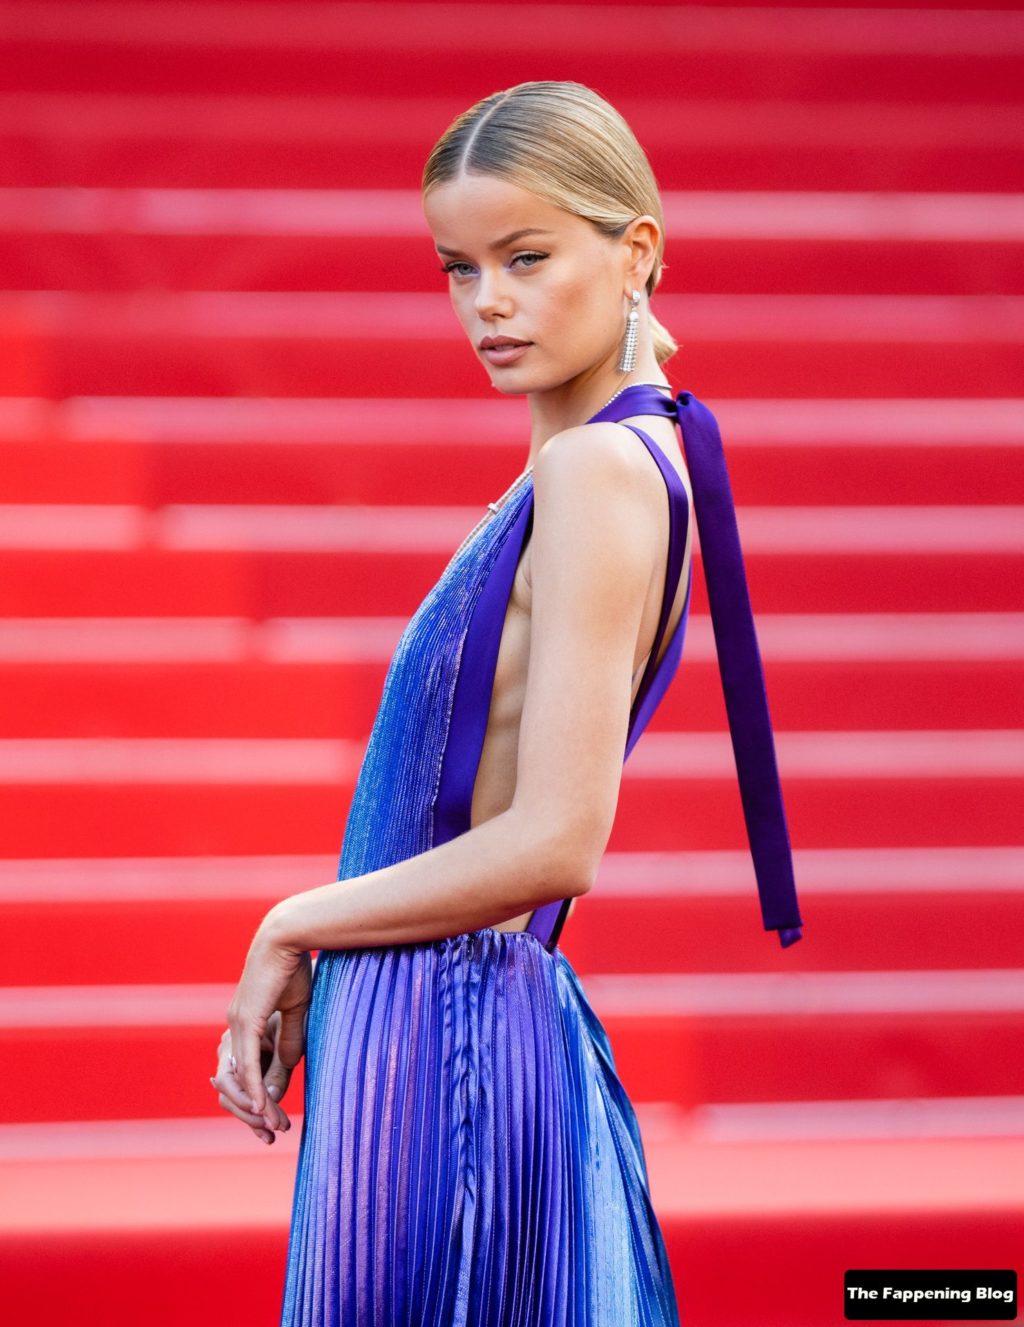 Frida Aasen Sexy The Fappening Blog 117 1 1024x1327 - Frida Aasen Poses on the Red Carpet at the 75th Annual Cannes Film Festival (150 Photos)